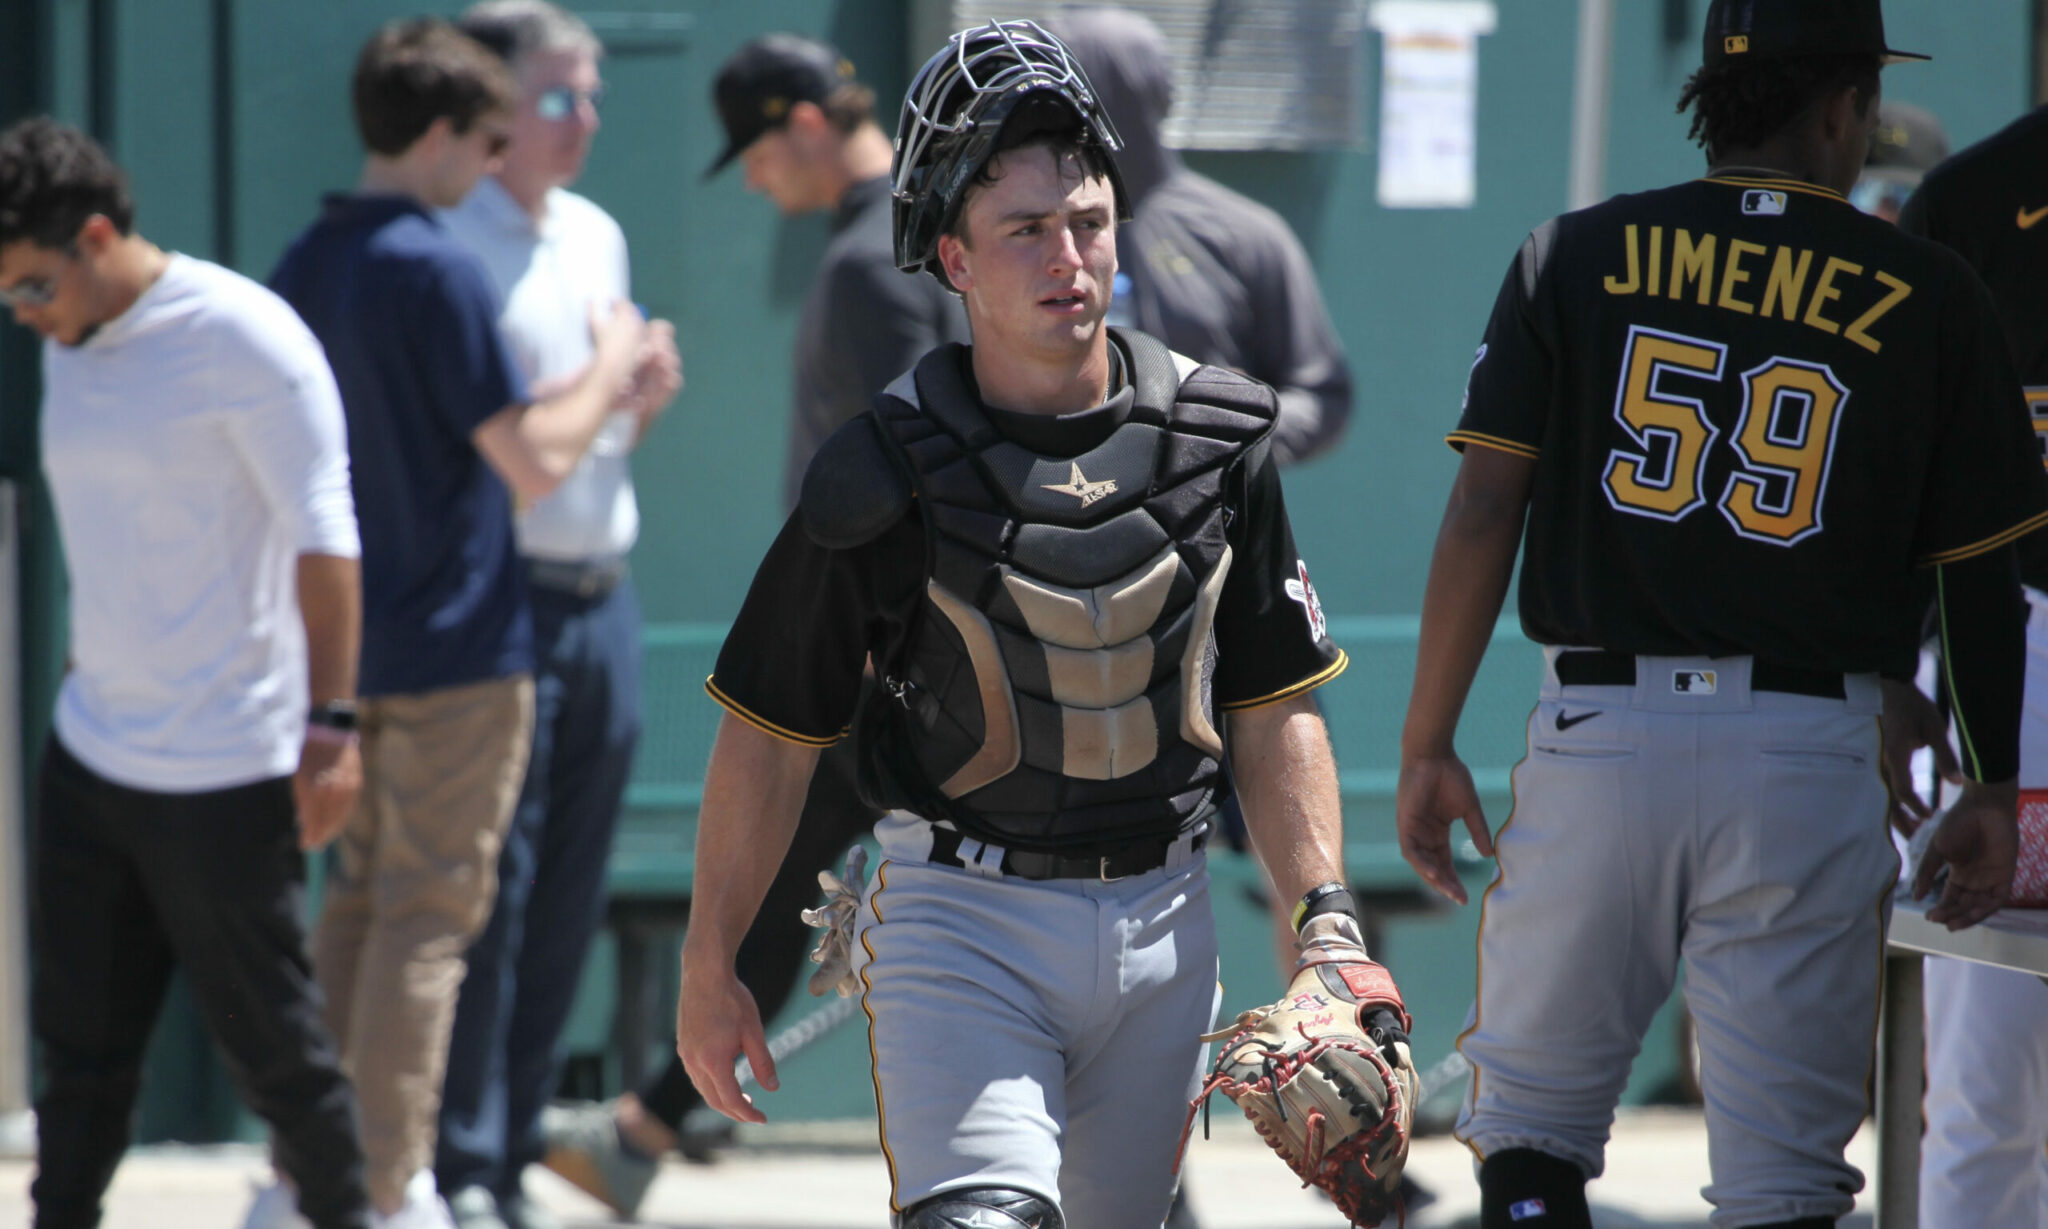 Pirates Prospects Daily: Looking At The Catching Depth At The Lower Levels